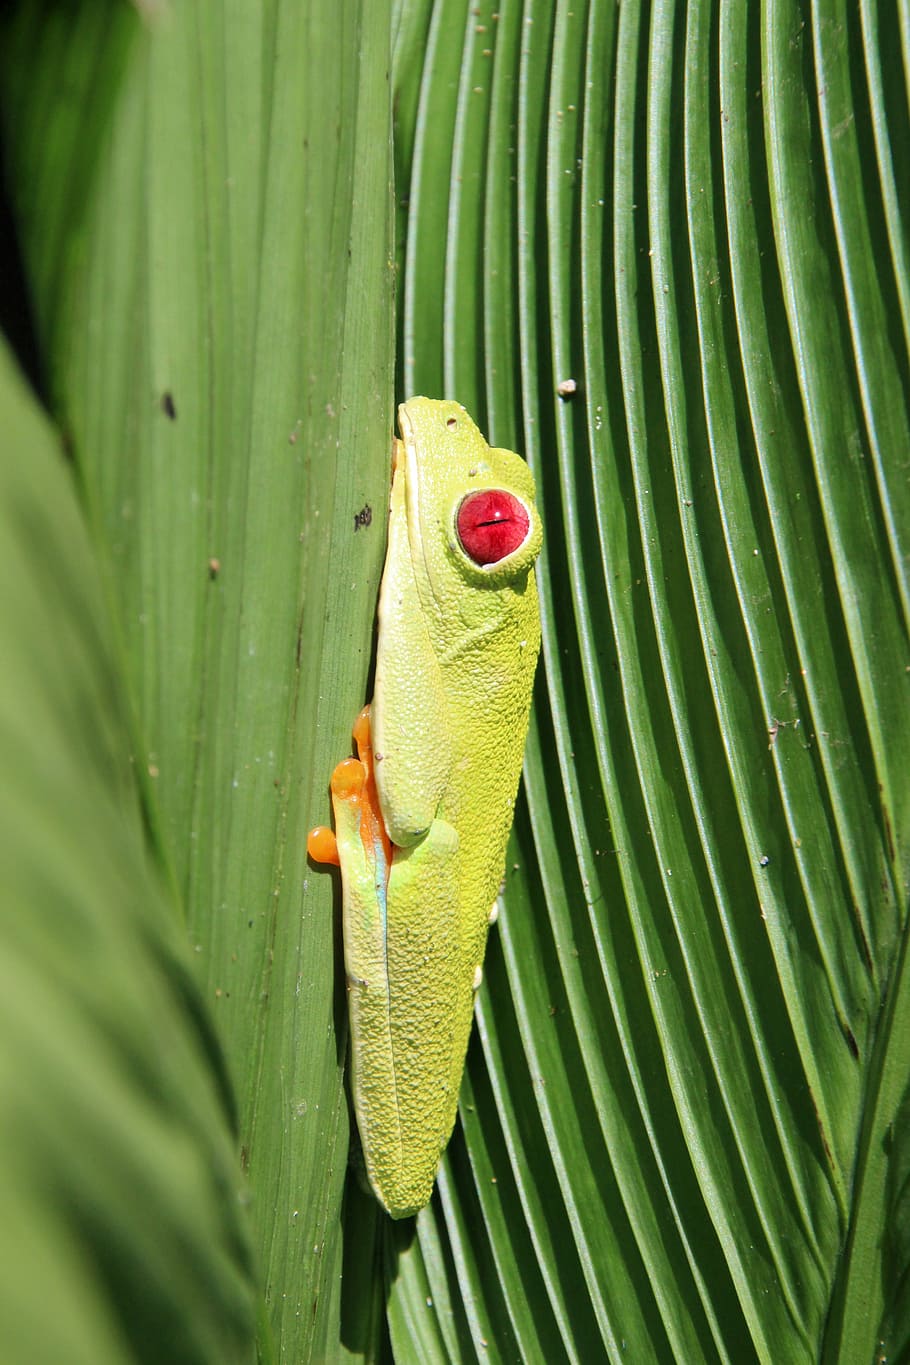 red-eyed tree frog, frog, costa rica, rainforest, green, tropical, jungle, exotic, nature, animal